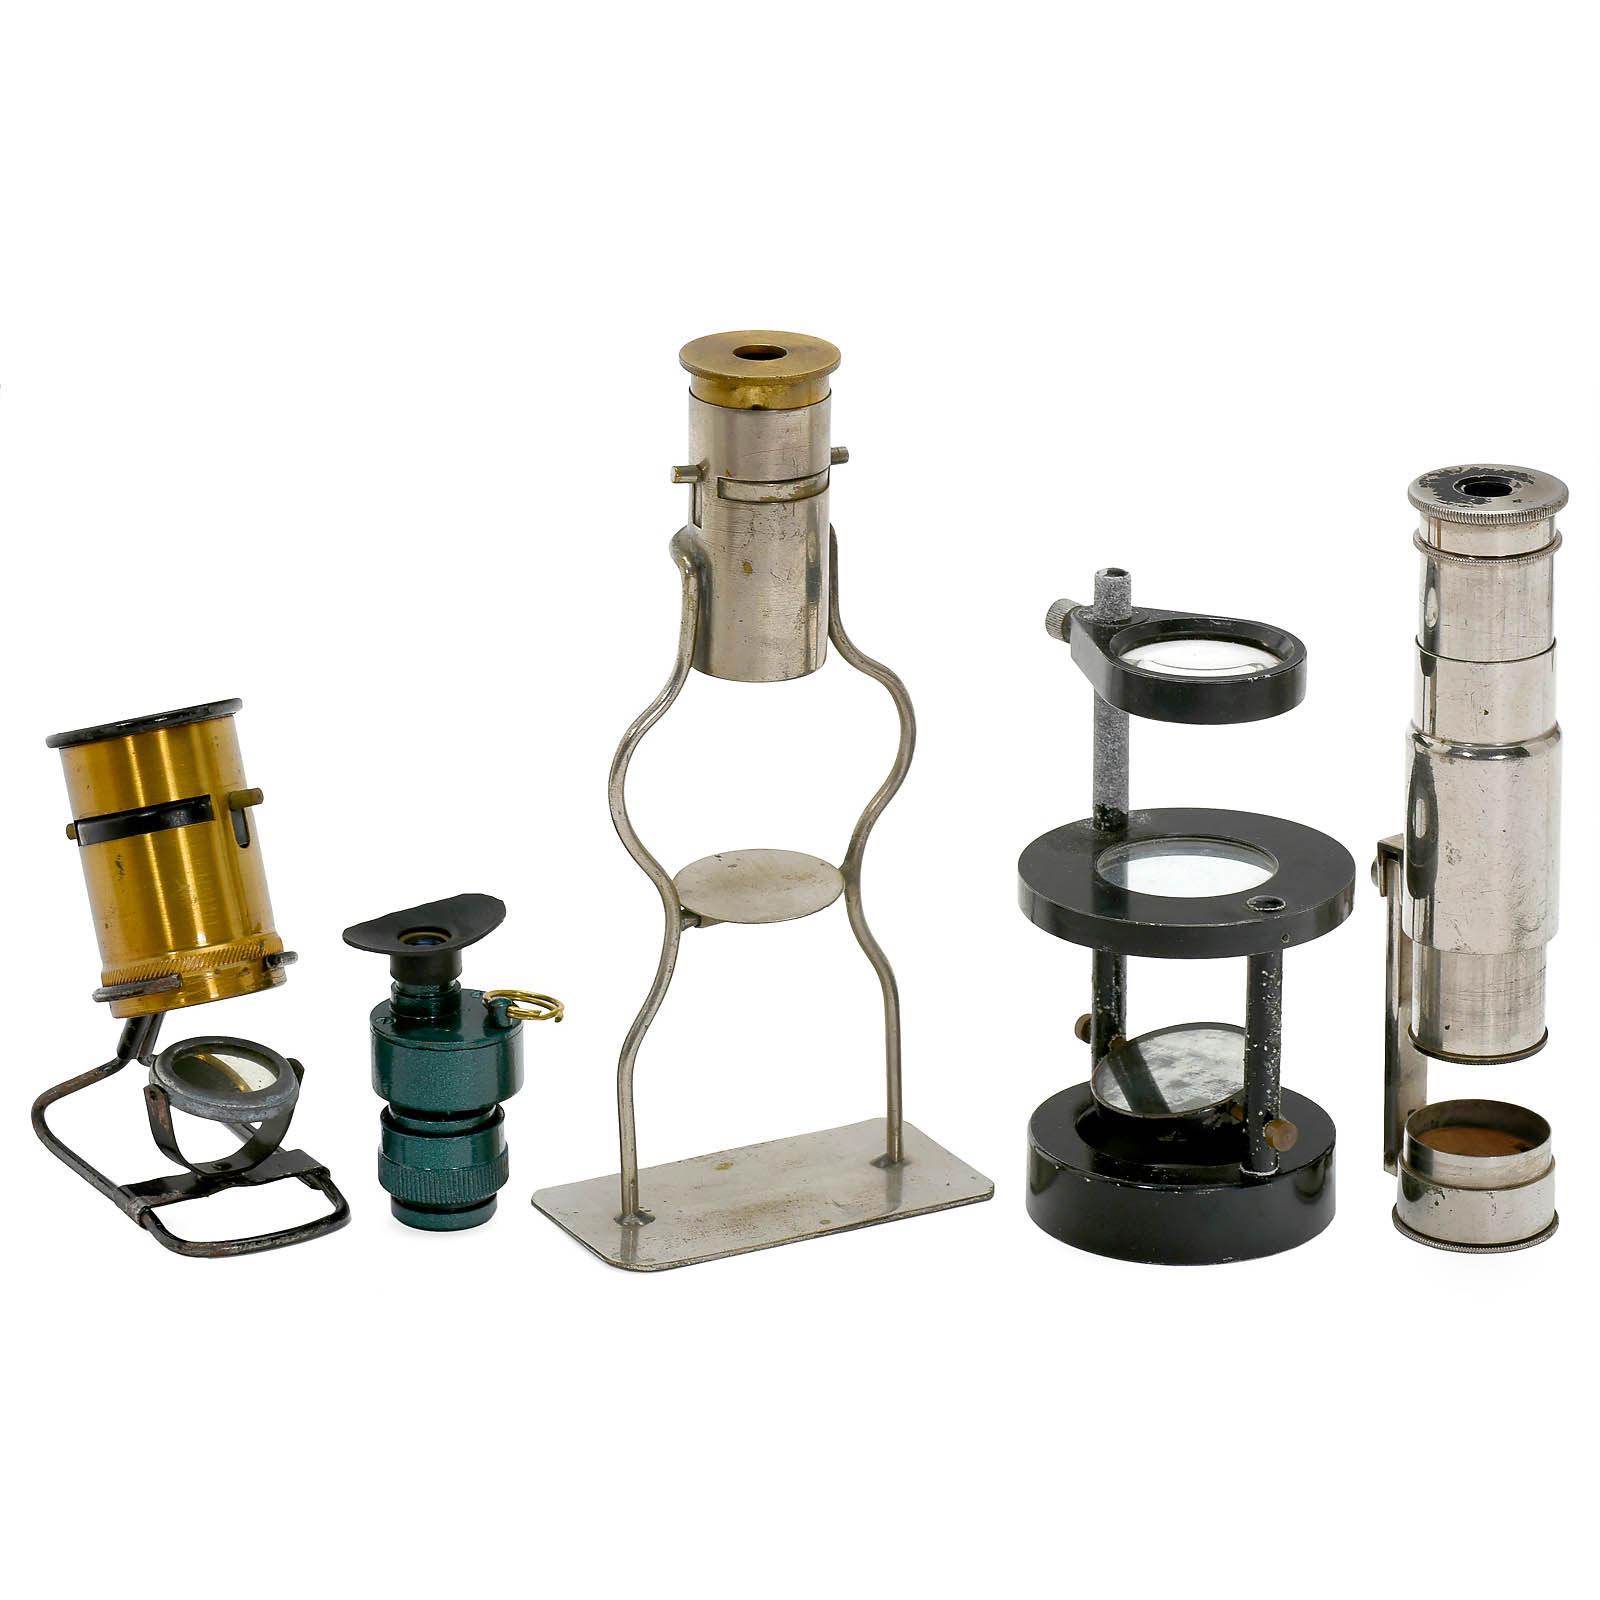 5 Simple Microscopes and Magnifiers
1) Linen tester, tilting stage, nickeled brass, height 5 ½